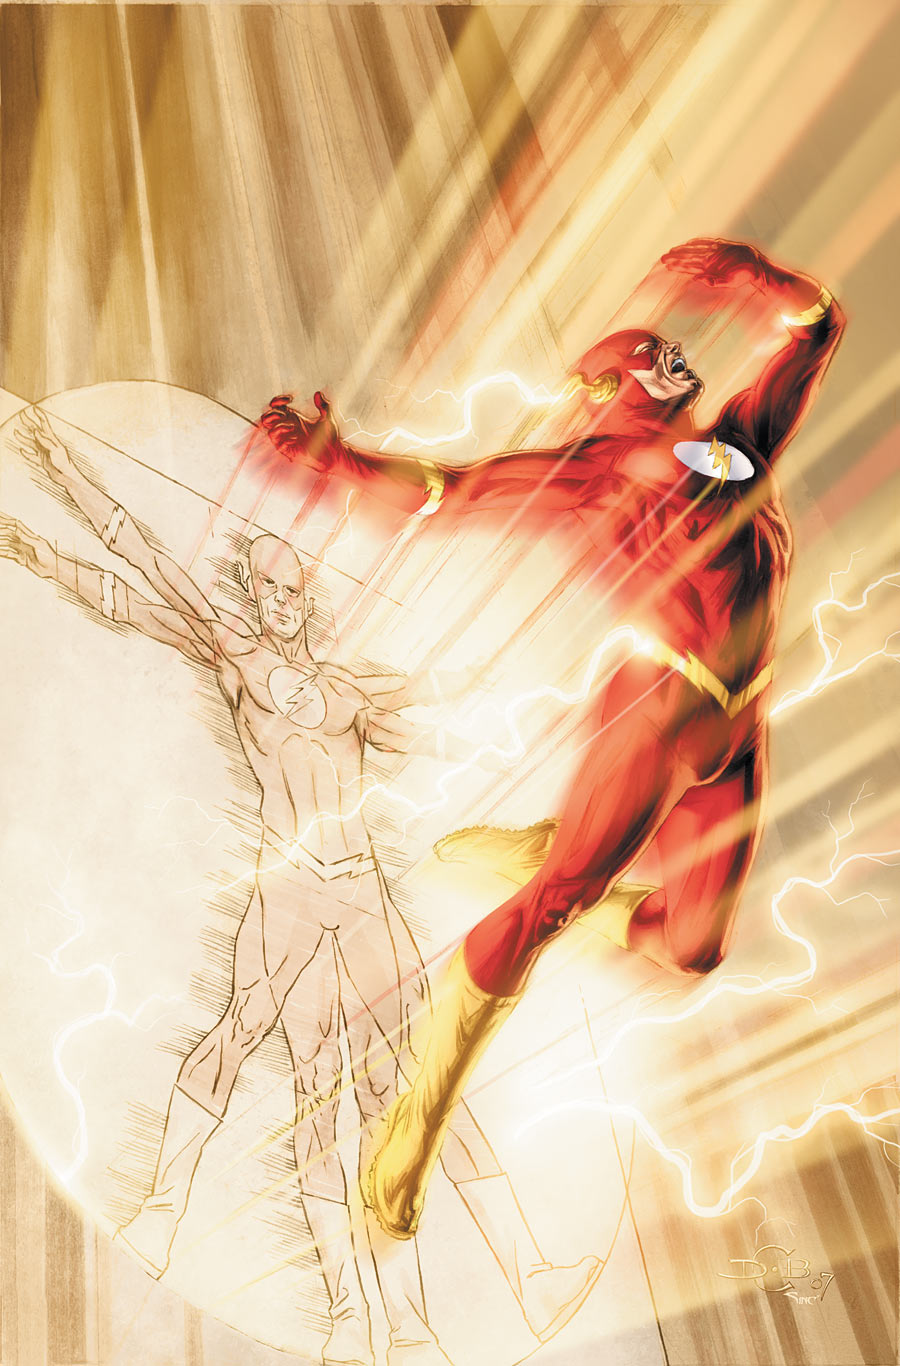 THE FLASH: THE FASTEST MAN ALIVE #15